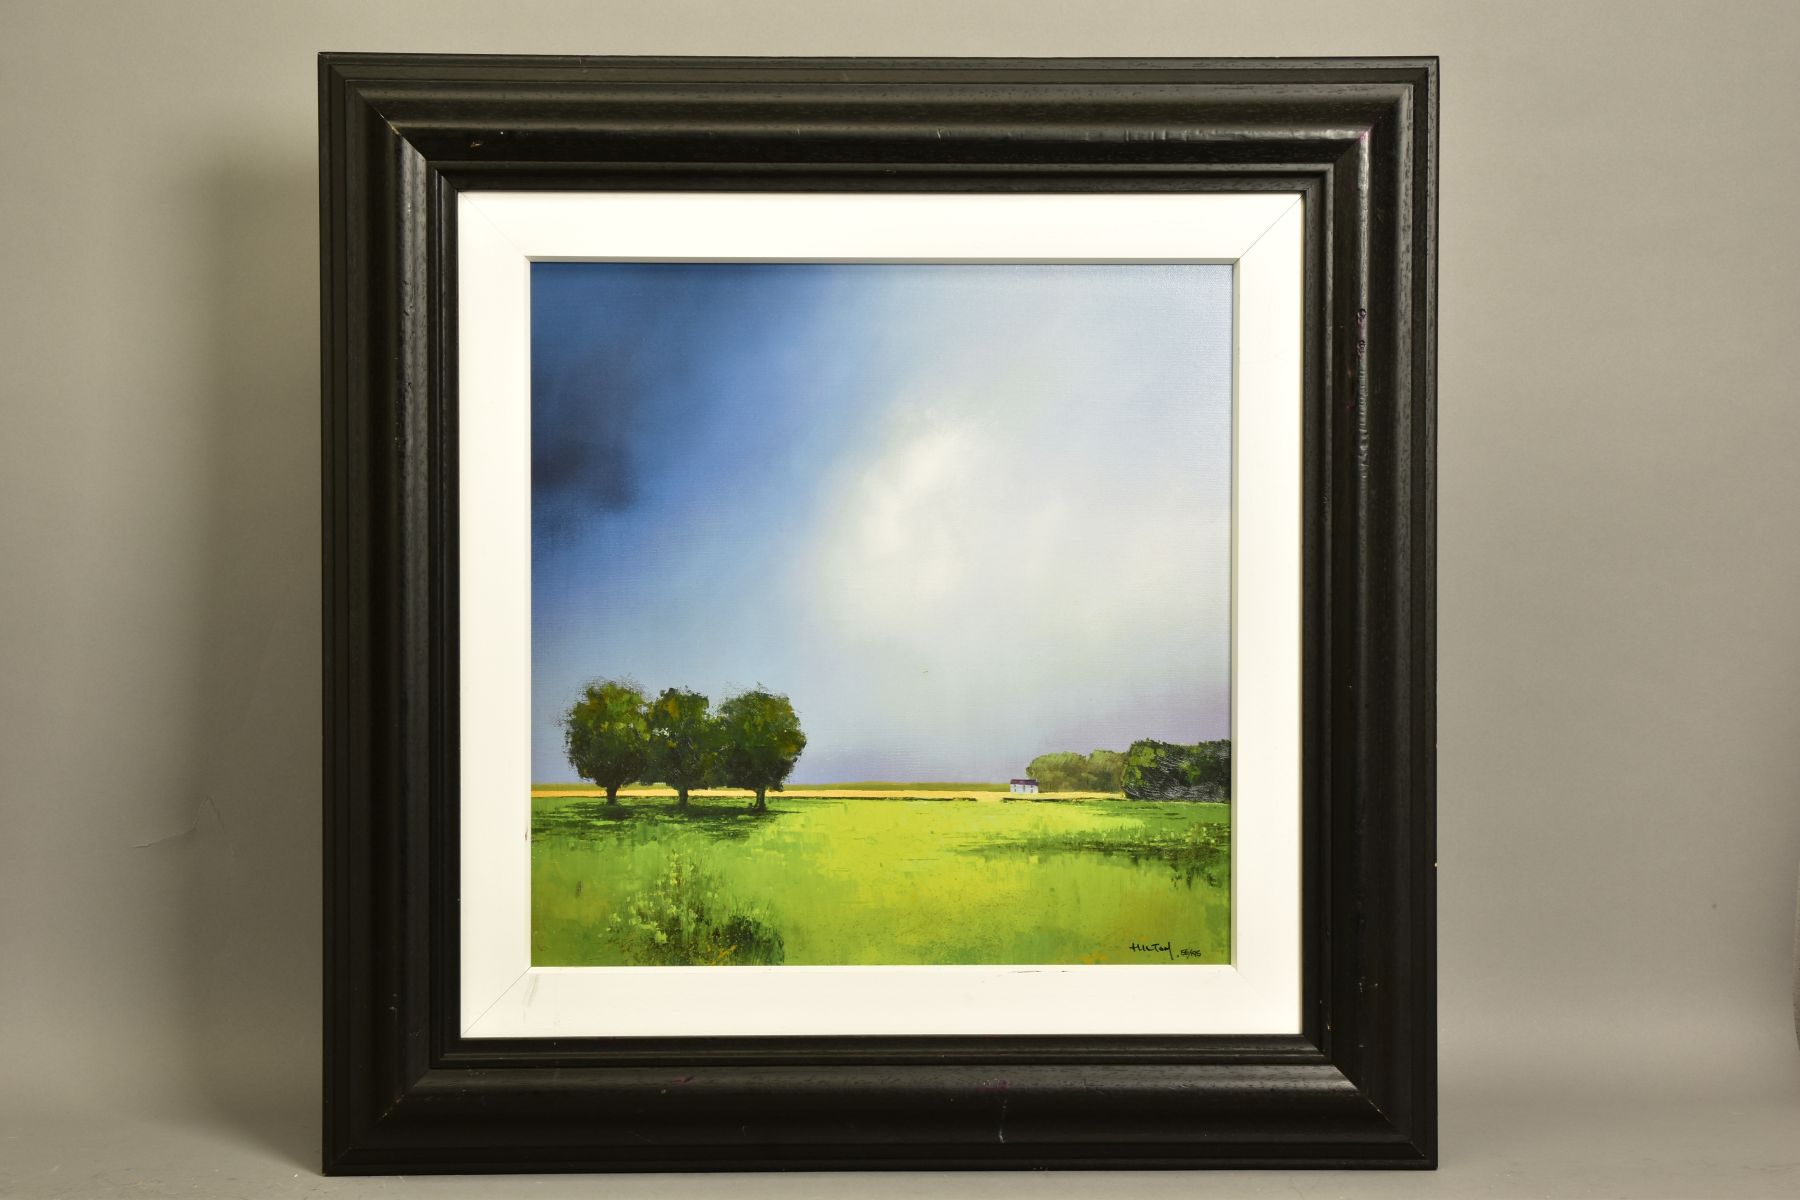 BARRY HILTON (BRITISH 1941) 'GREEN FIELDS OF HOME' a limited edition print of a landscape, signed